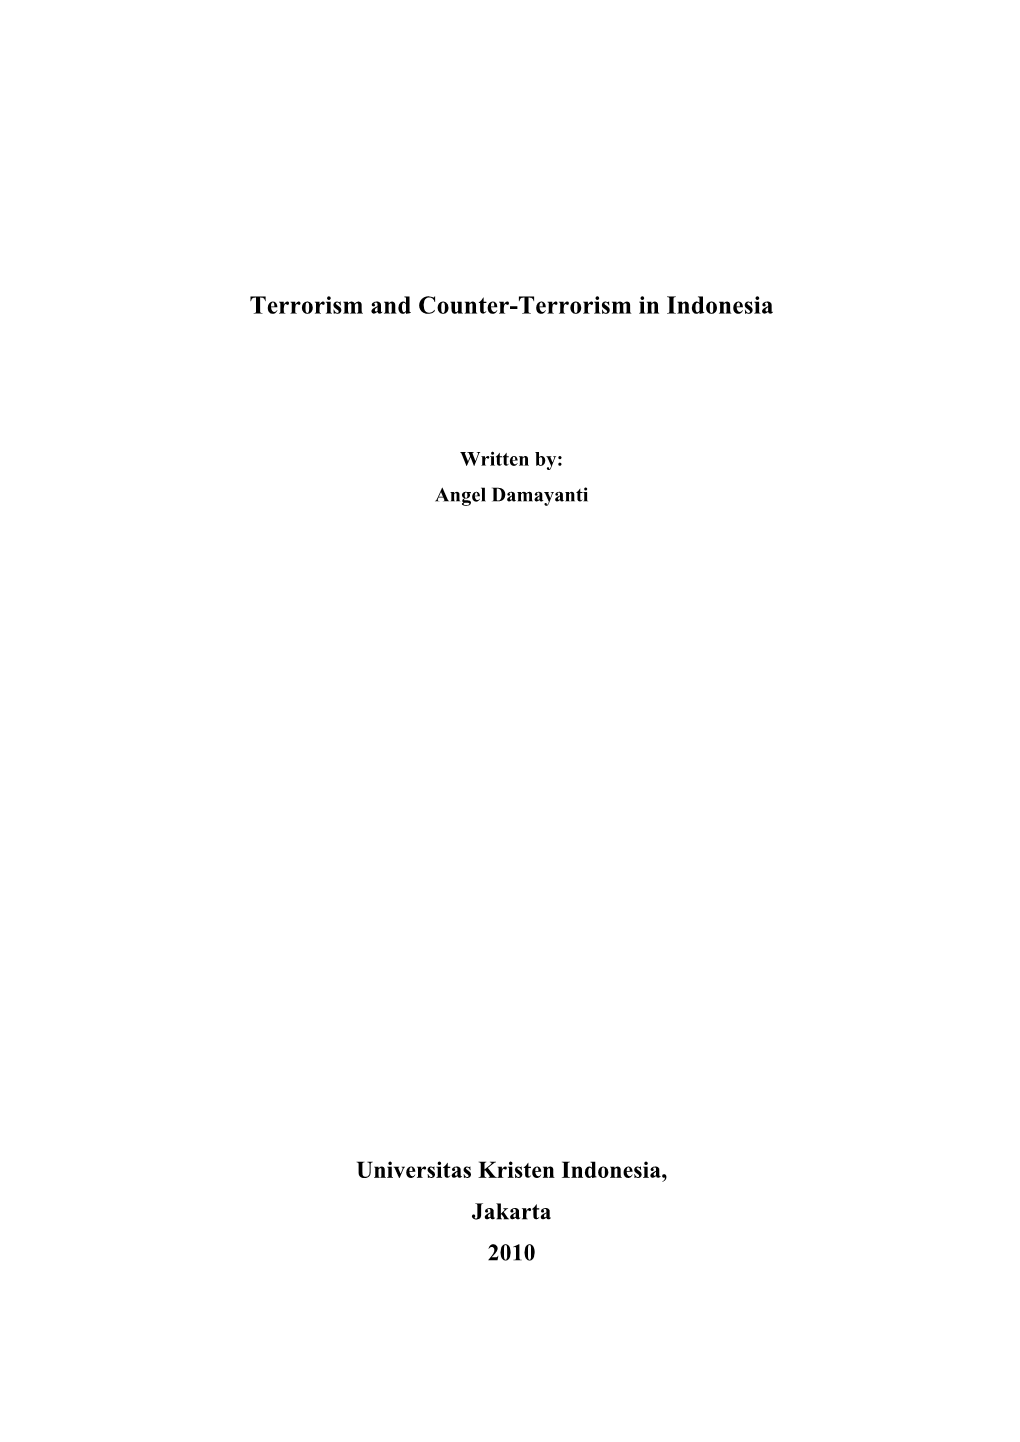 Terrorism and Counter-Terrorism in Indonesia